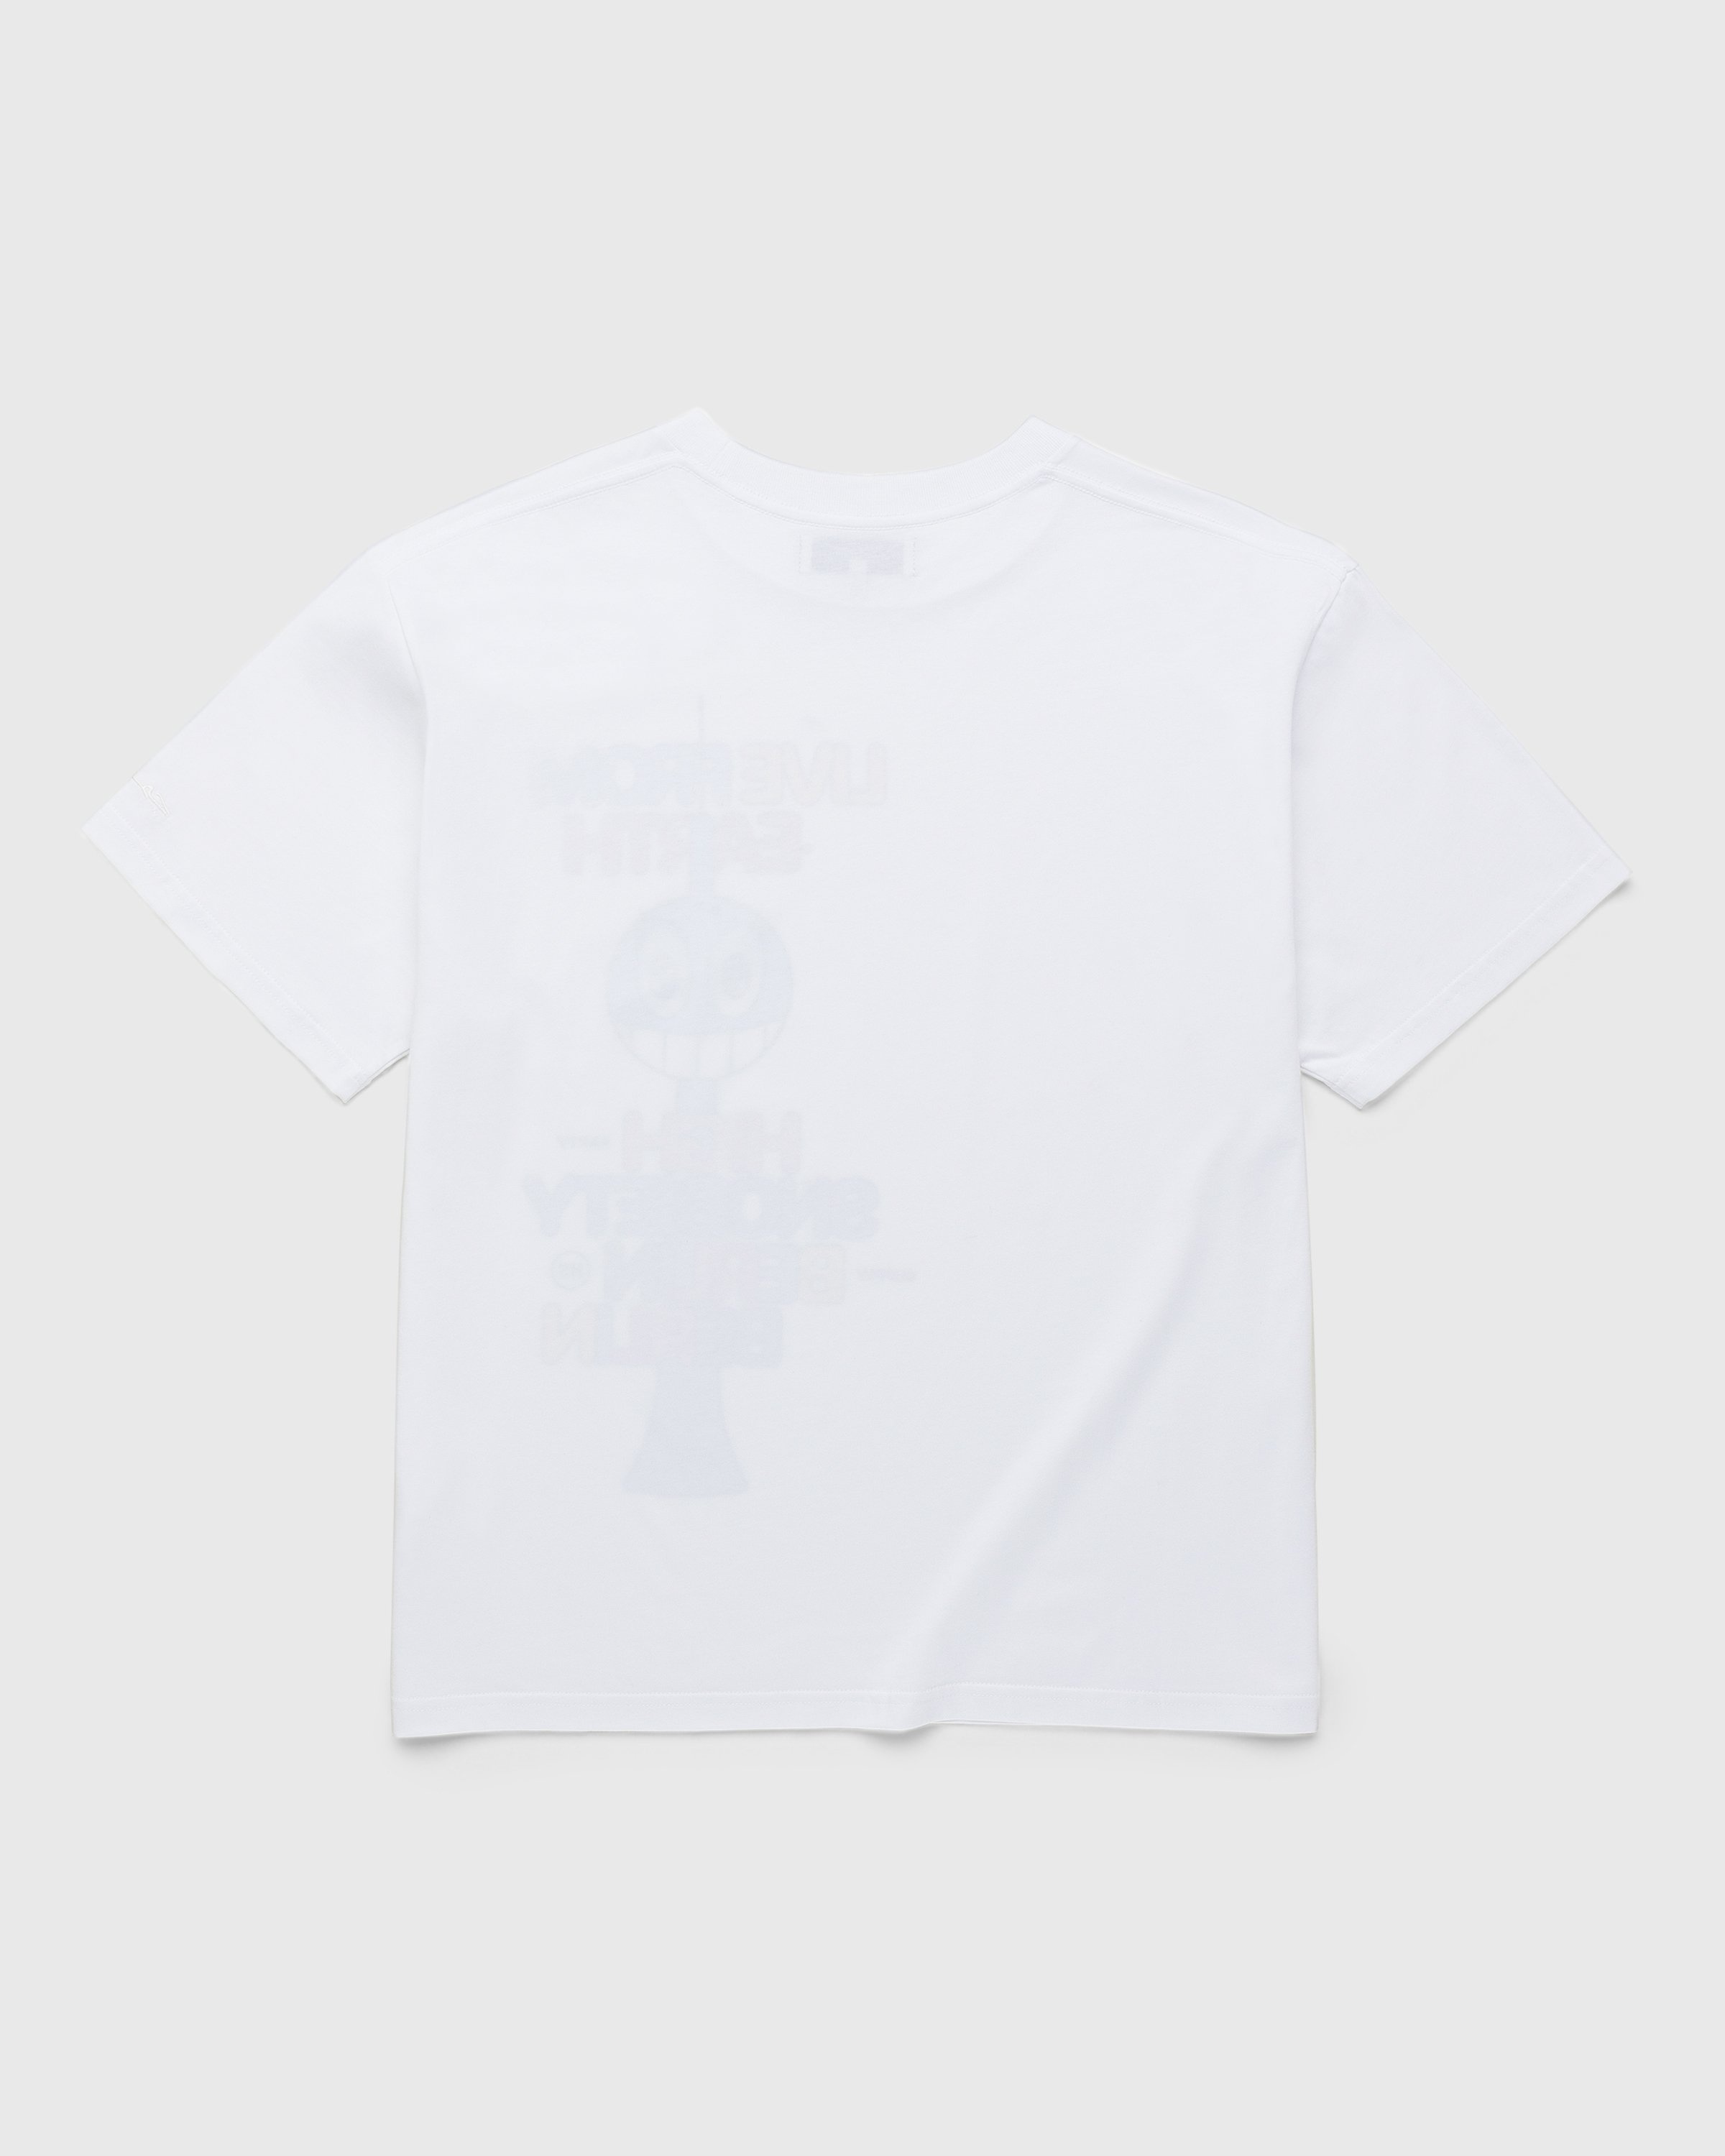 Live From Earth x Highsnobiety – BERLIN, BERLIN 3 T-Shirt White - Tops - White - Image 2